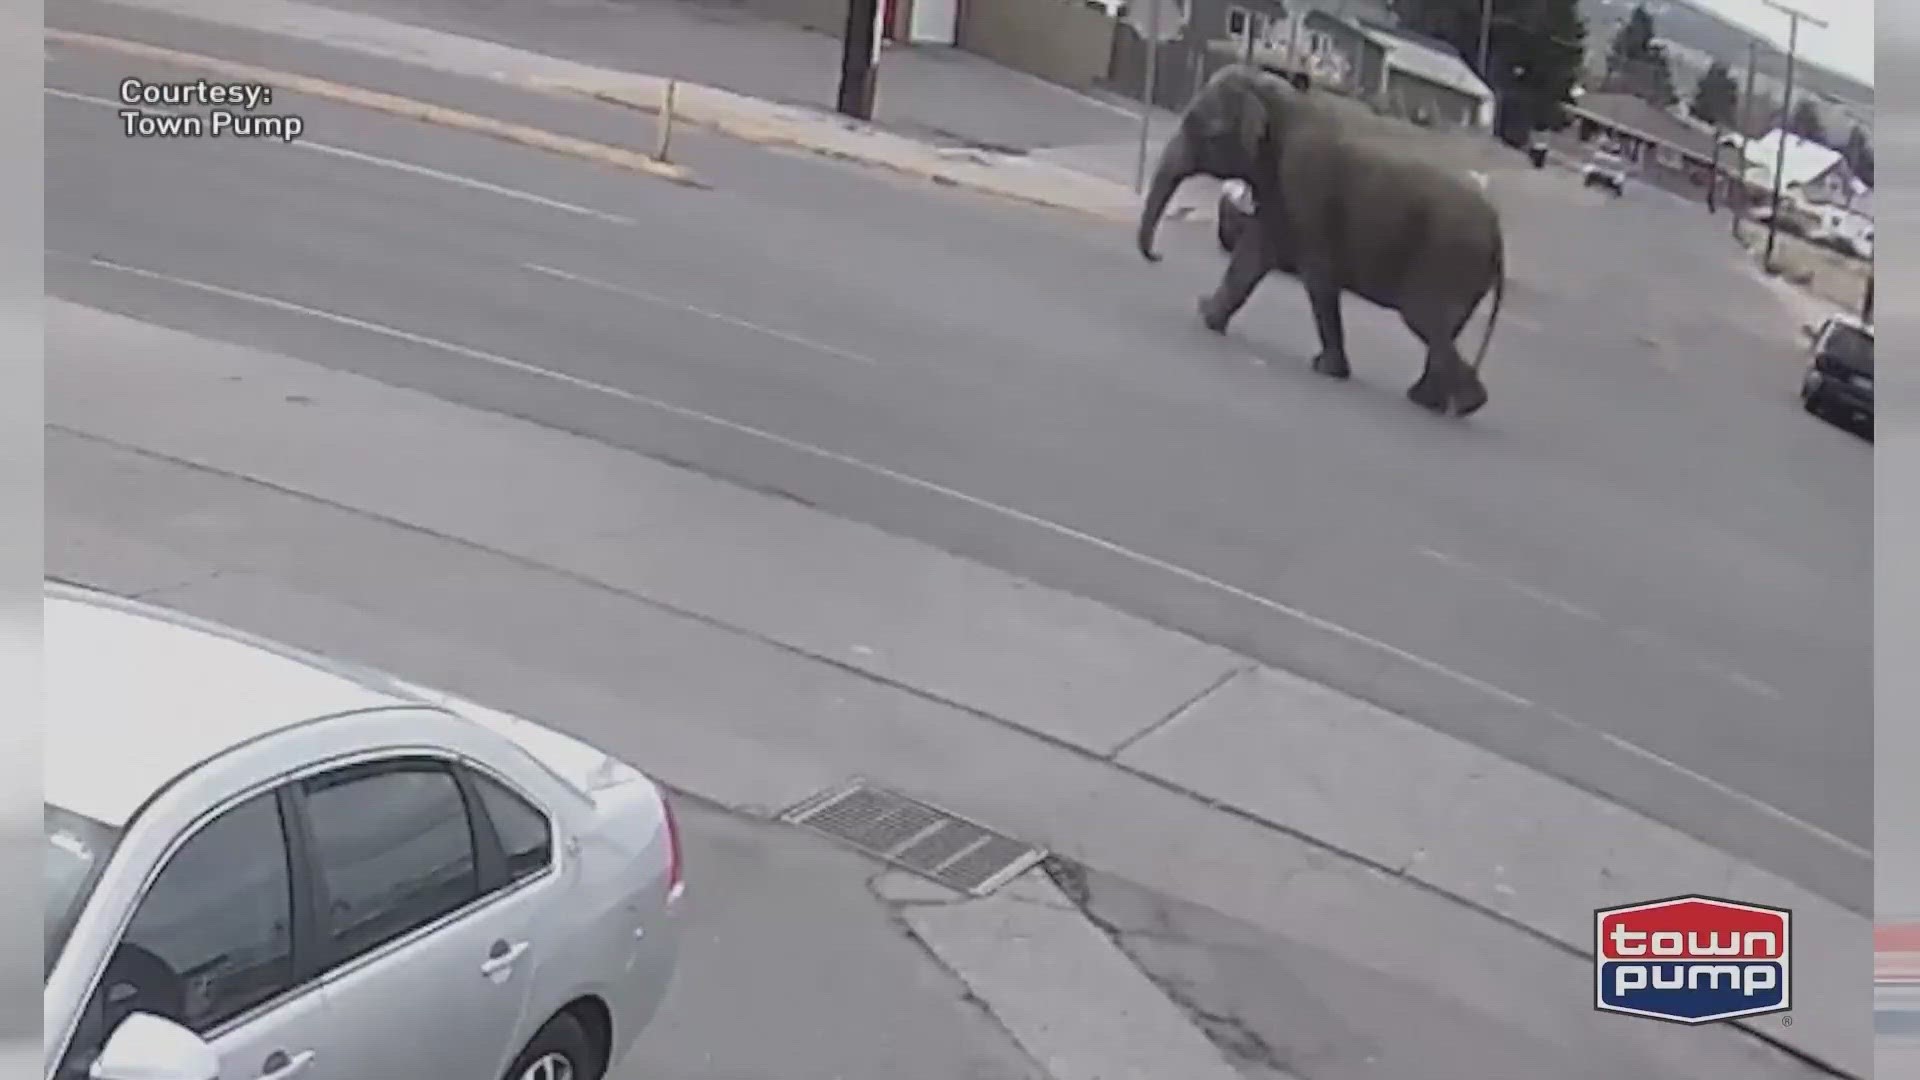 An elephant was spotted roaming the streets of Butte, Montana after escaping from a traveling circus.